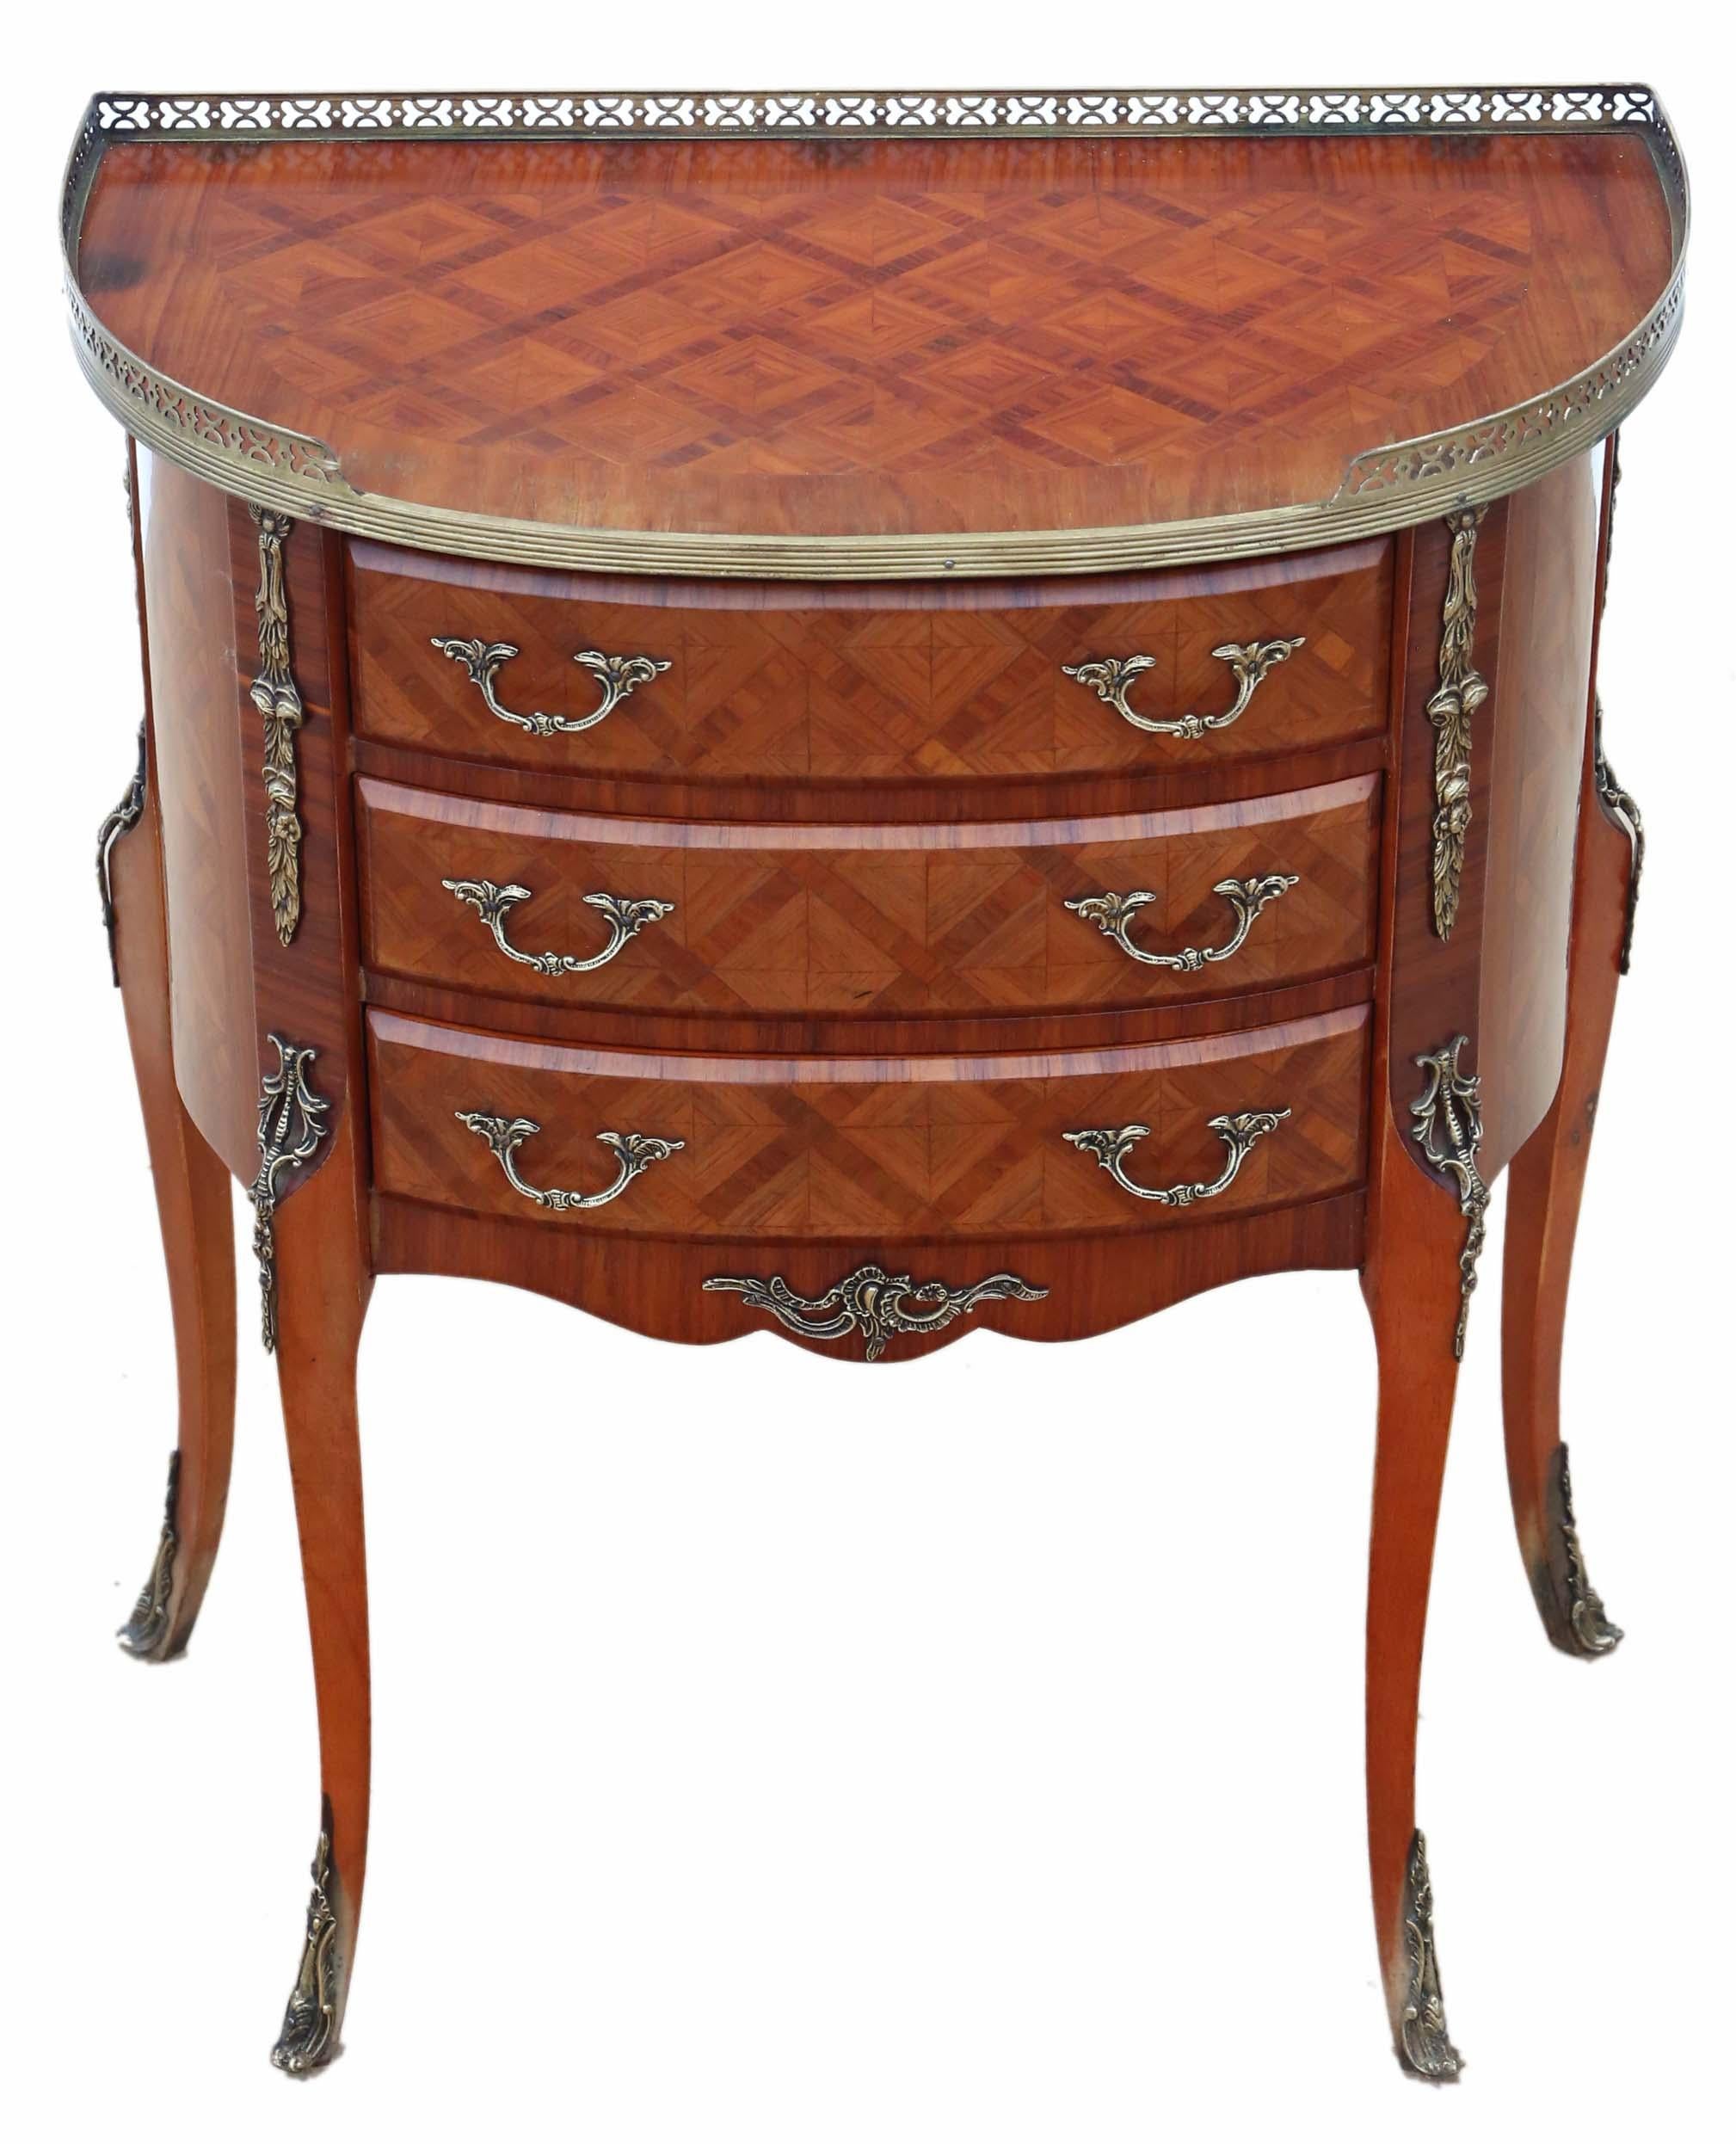 Antique quality large French inlaid parquetry bedside table or cupboard.

No loose joints and no woodworm. Full of age, character and charm. Attractive demilune shape, parquetry inlays, brass ormolu mounts and gallery. The mahogany lined drawers